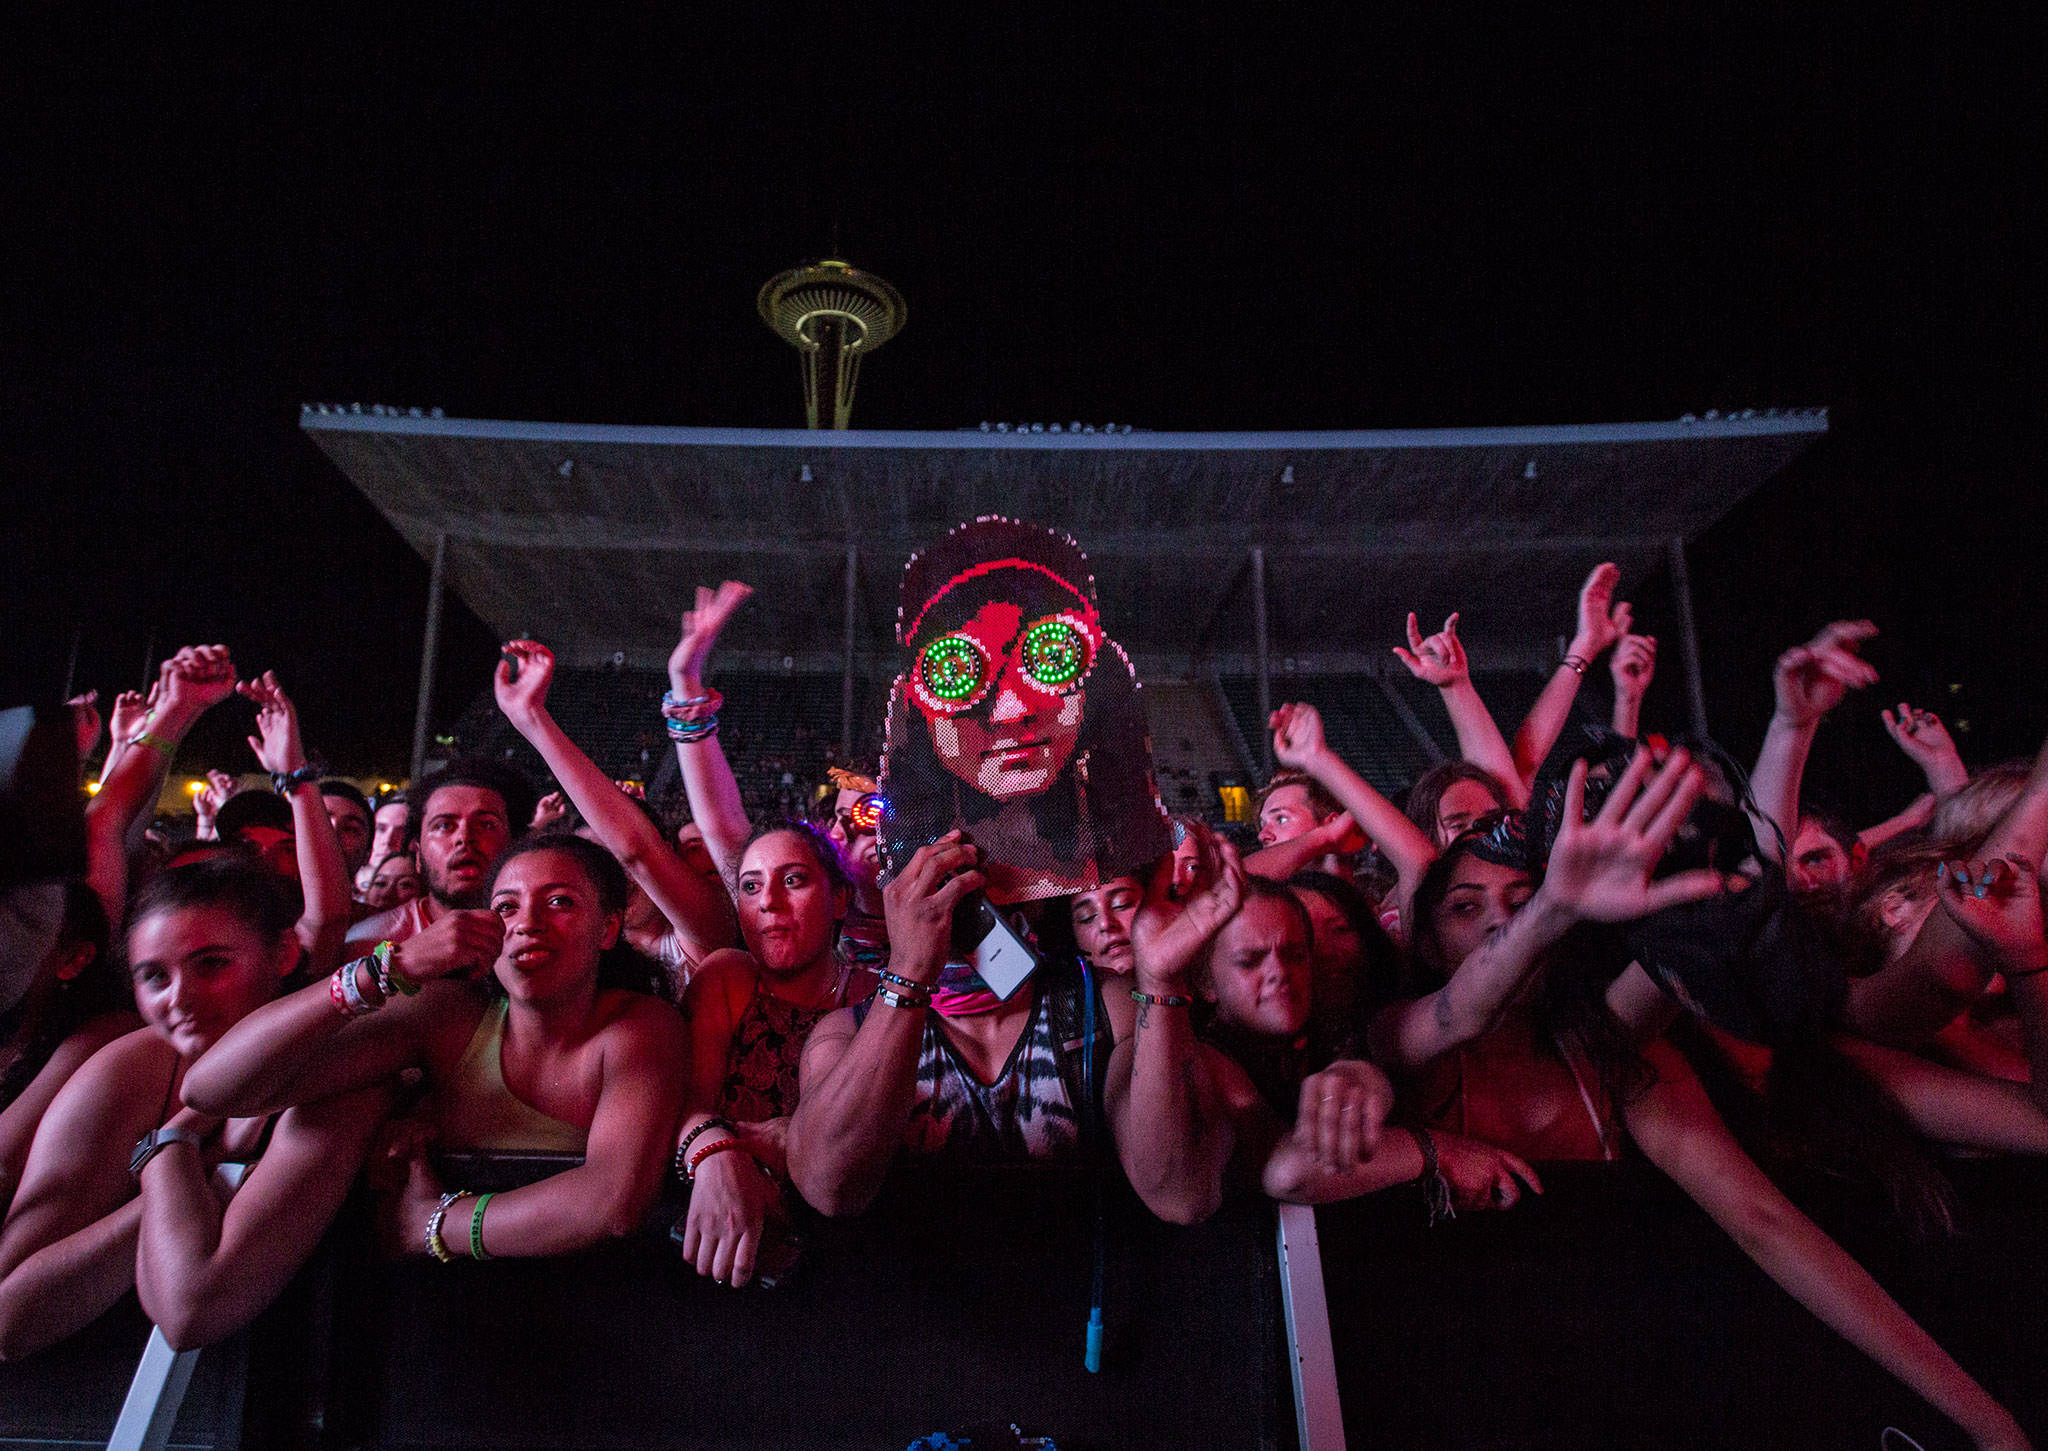 A Rezz fan holds up a large perler of her face during her performance at Bumbershoot Music & Arts Festival on Sunday, Sept. 1, 2019 in Seattle, Wash. (Olivia Vanni / The Herald)